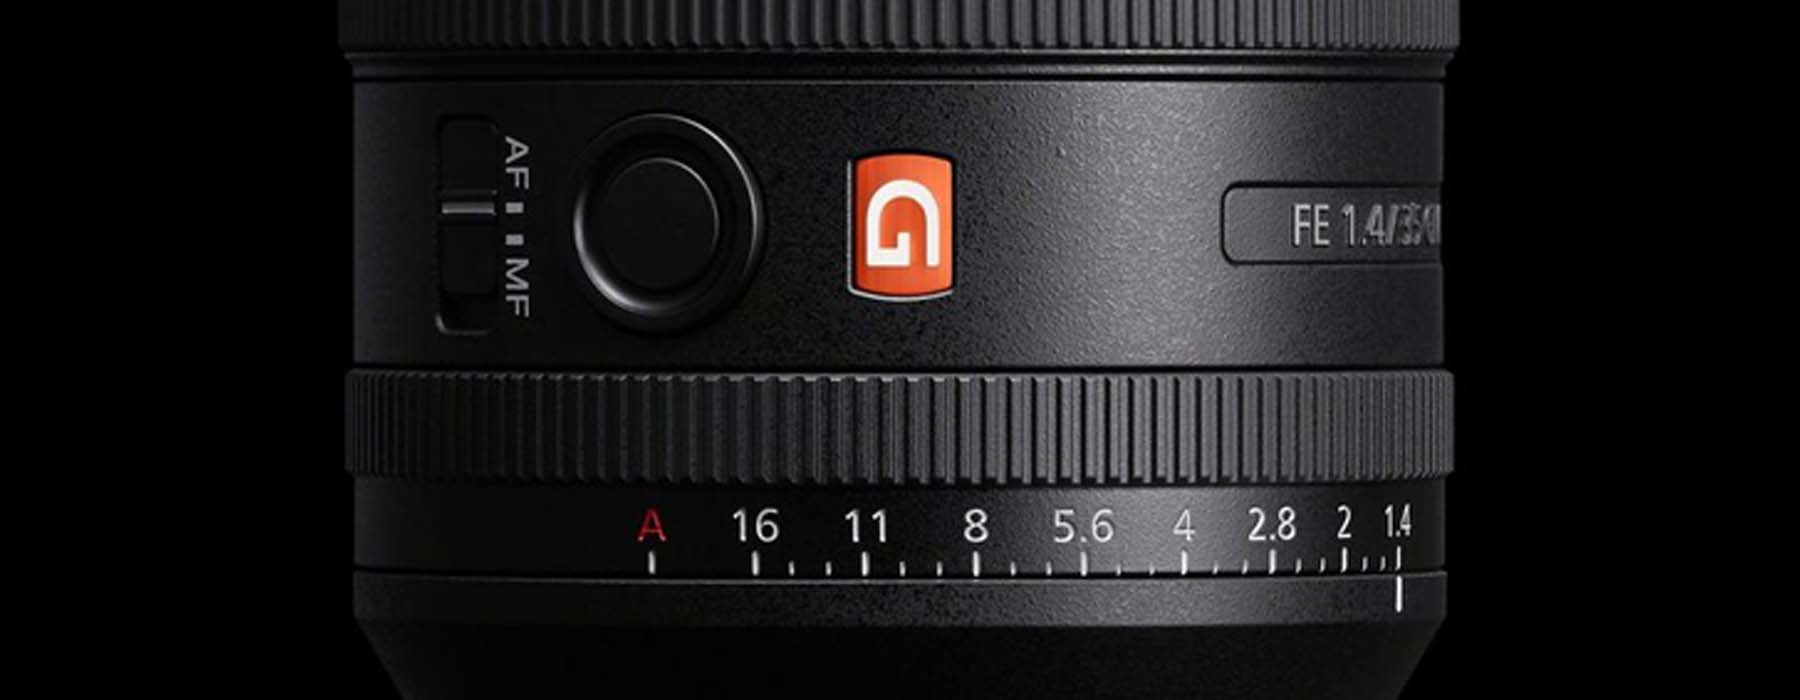 Why GM lenses are ultimate choice for your camera